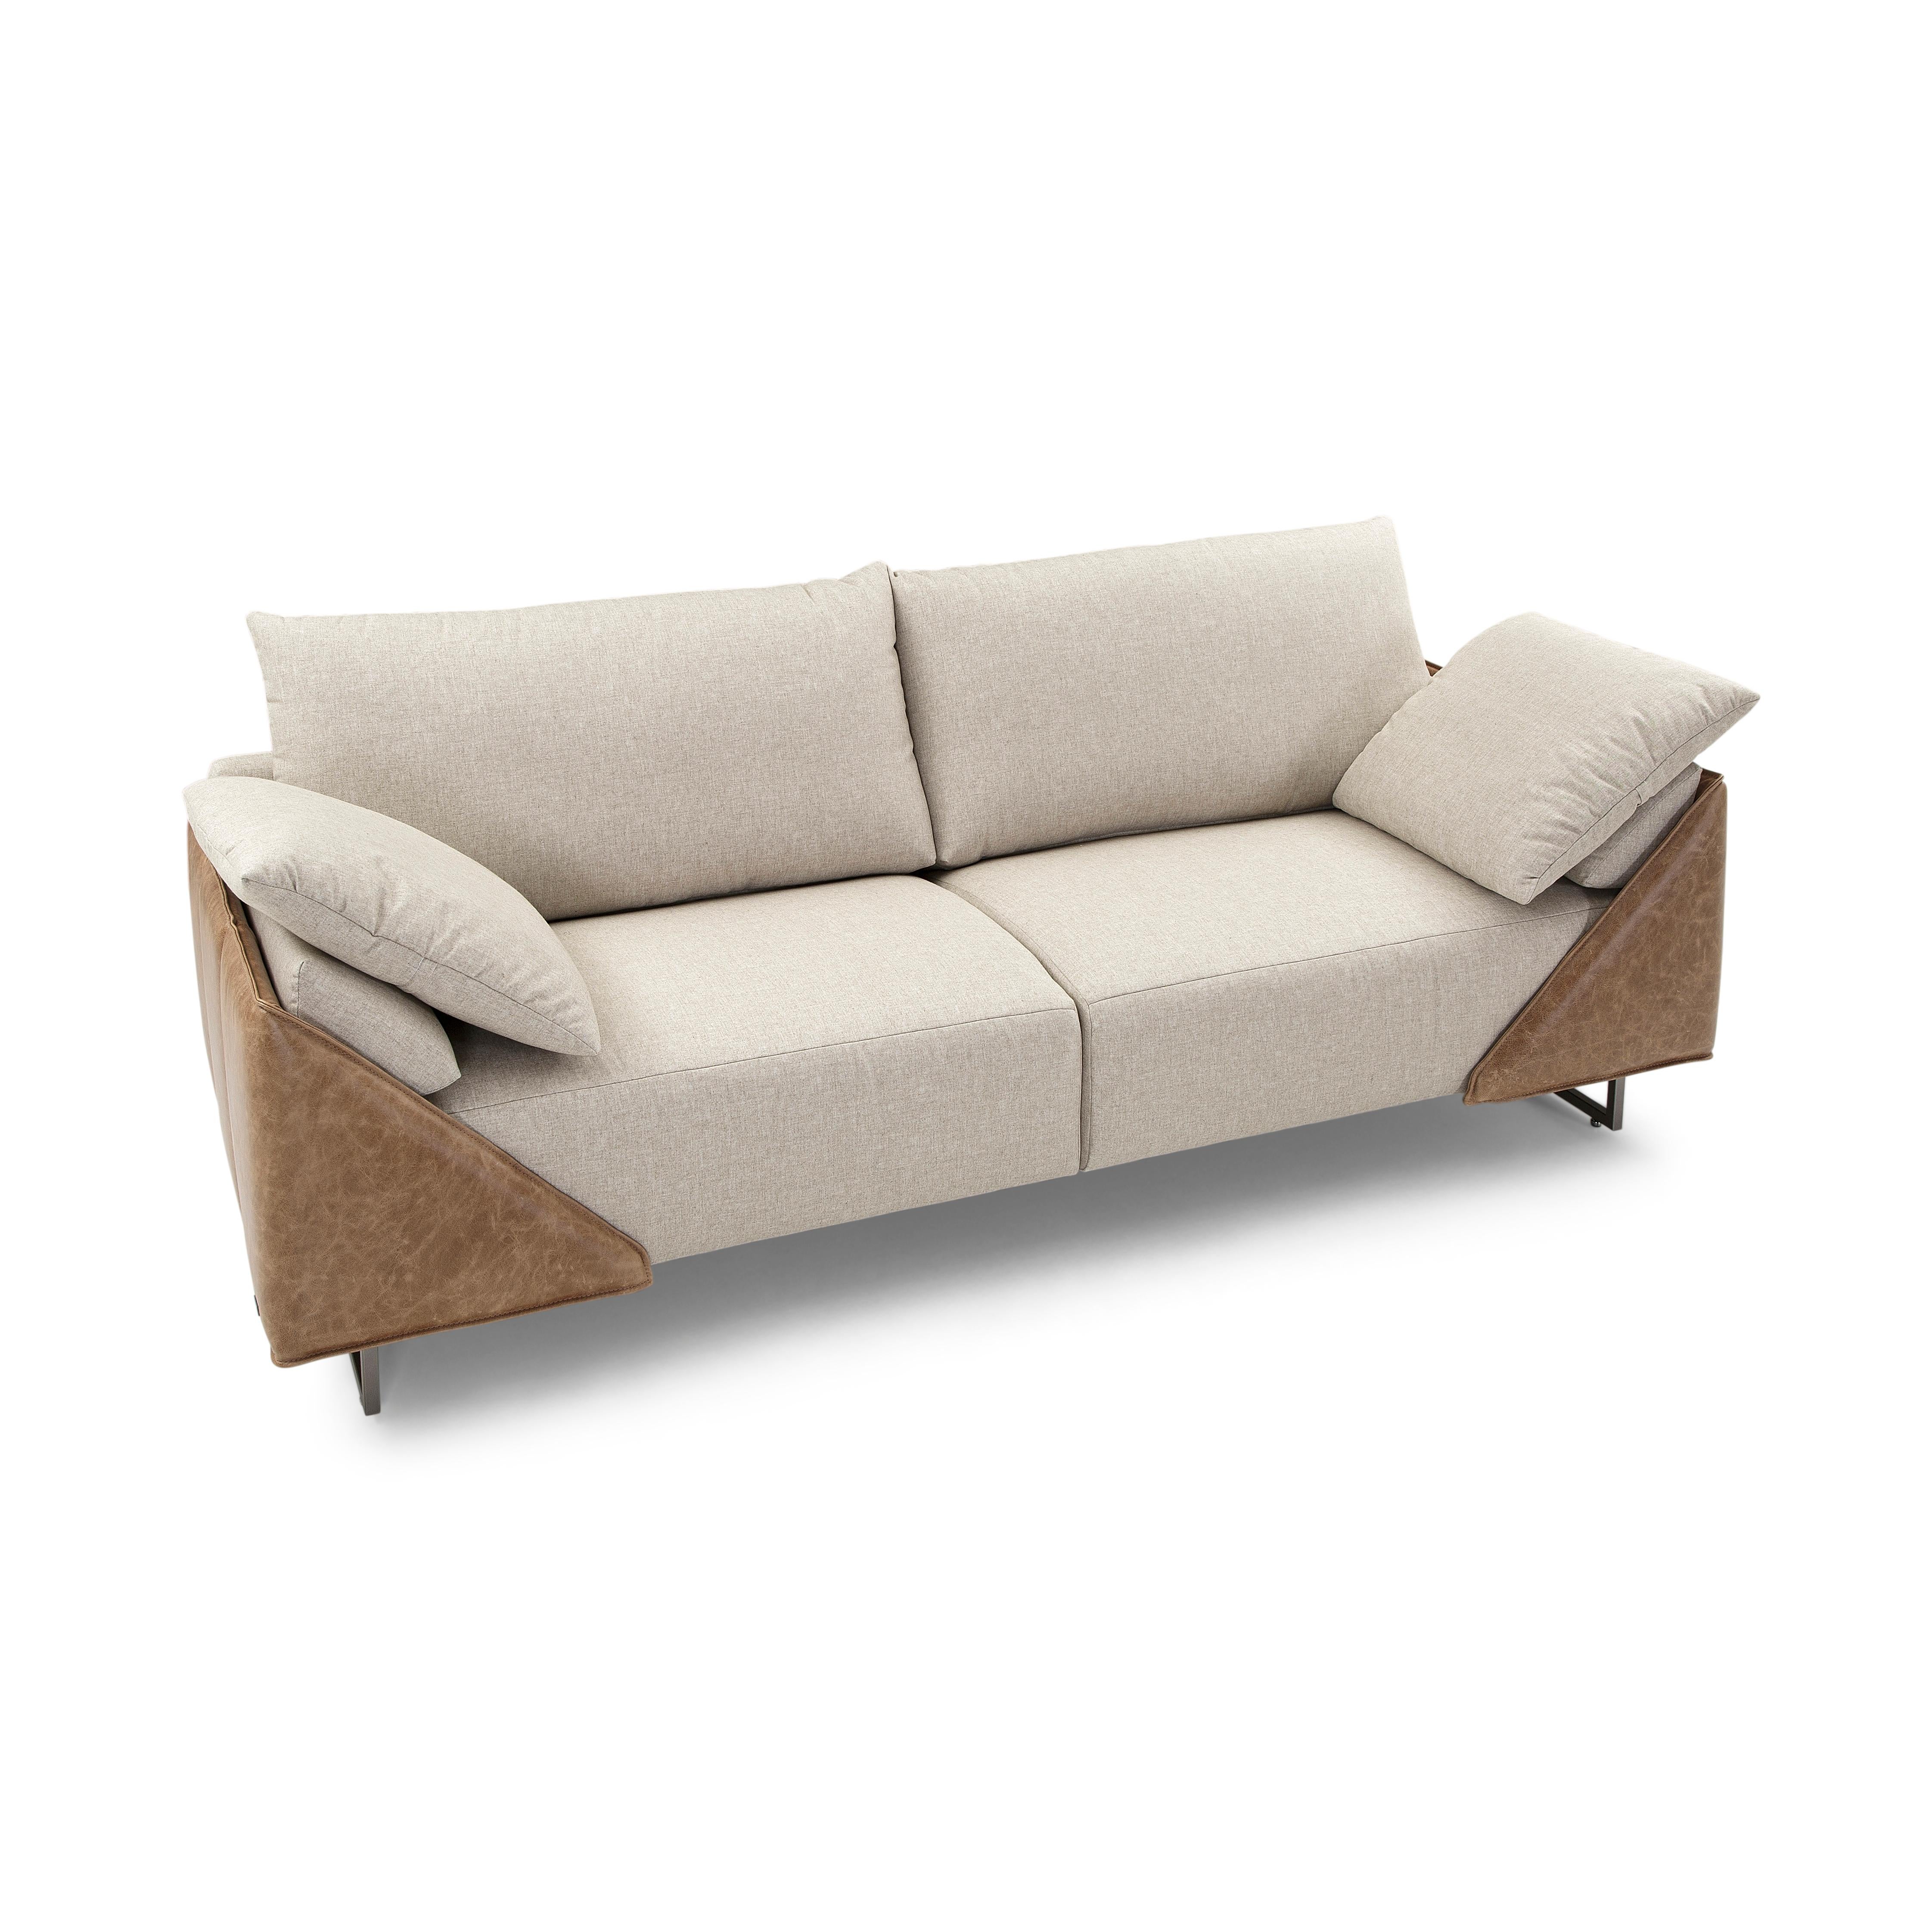 Gondole Contemporary Sofa Upholstered in a Beige Fabric and Brown Leather  1